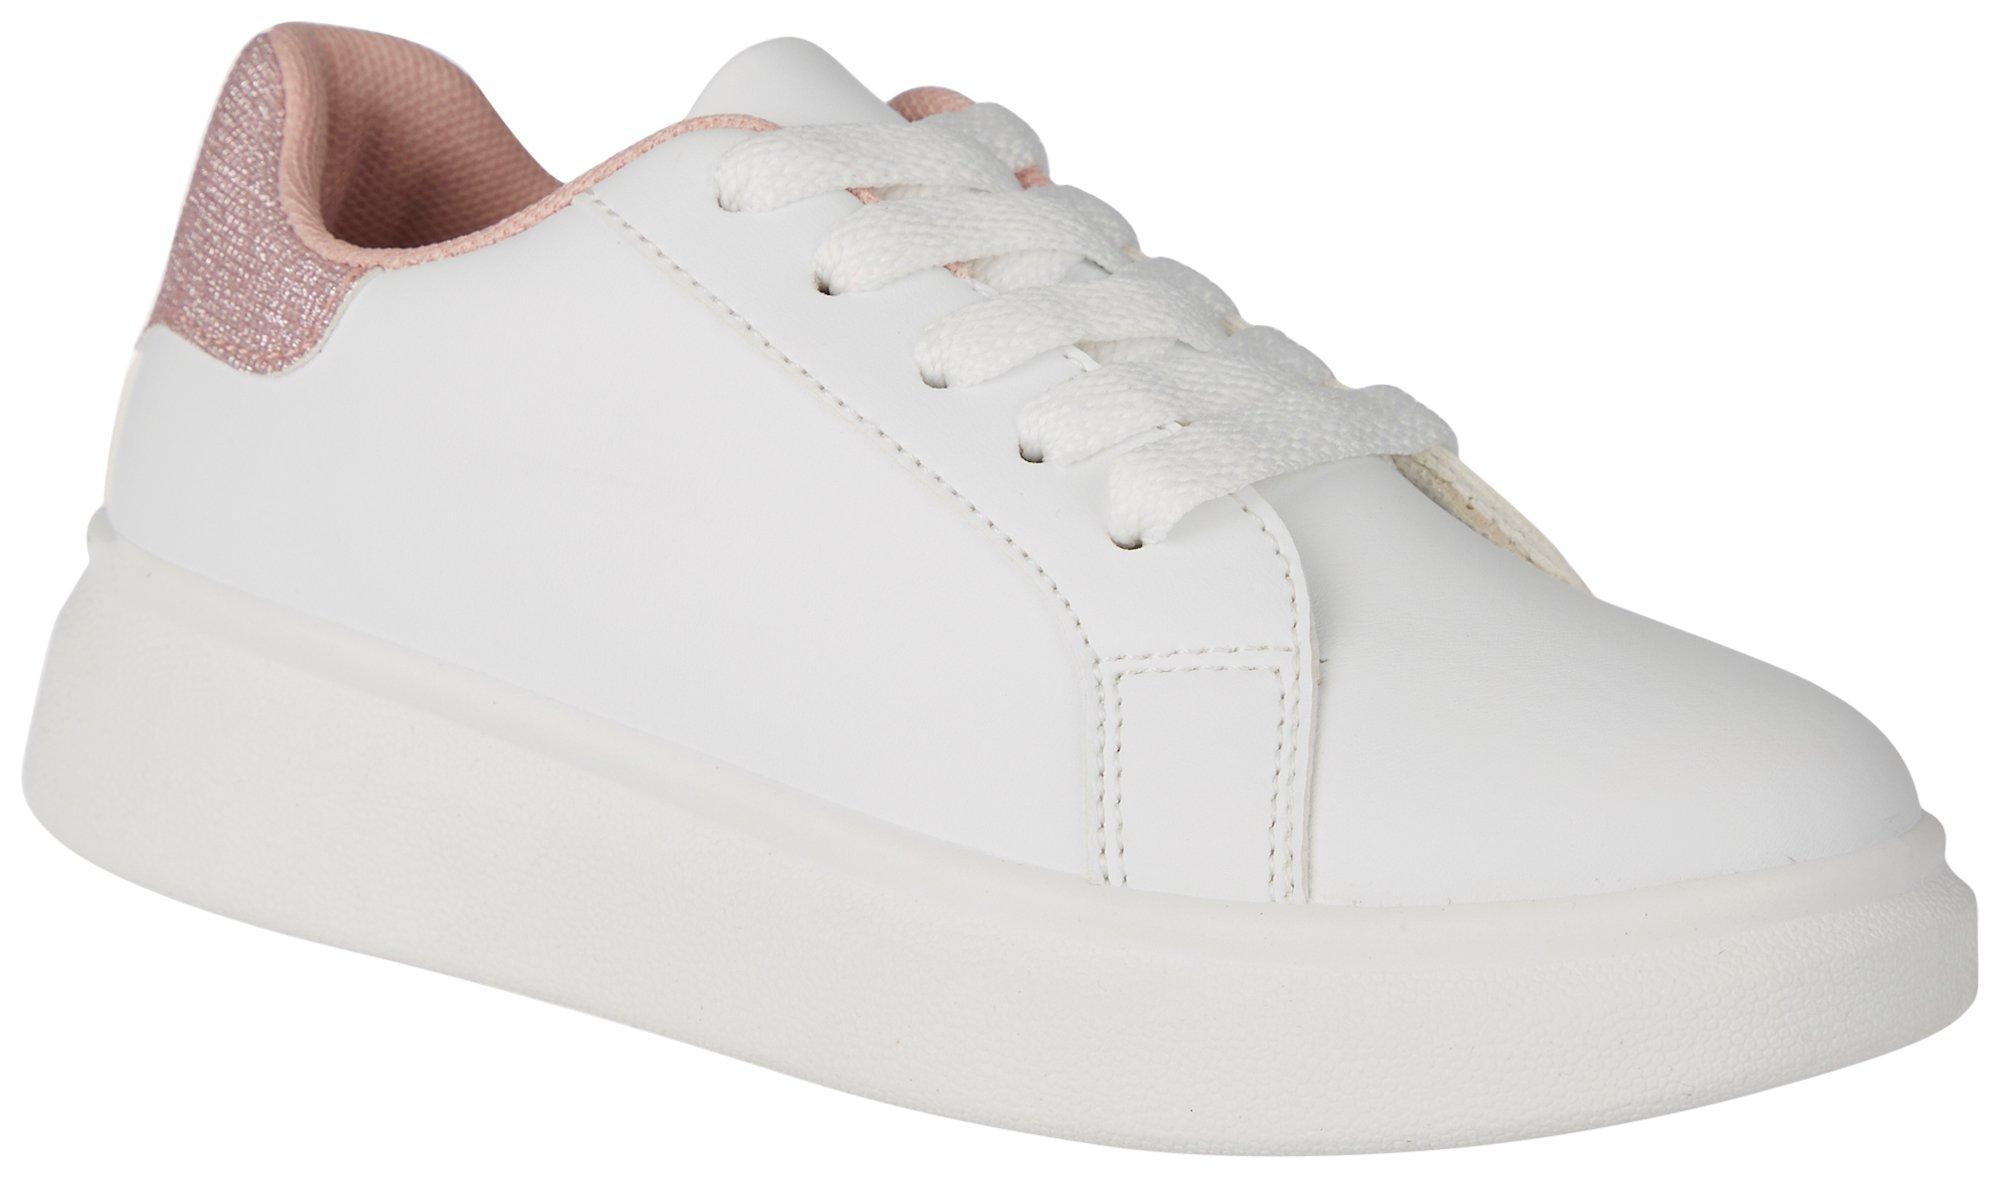 US Sports Low Top Court Canvas Sneaker